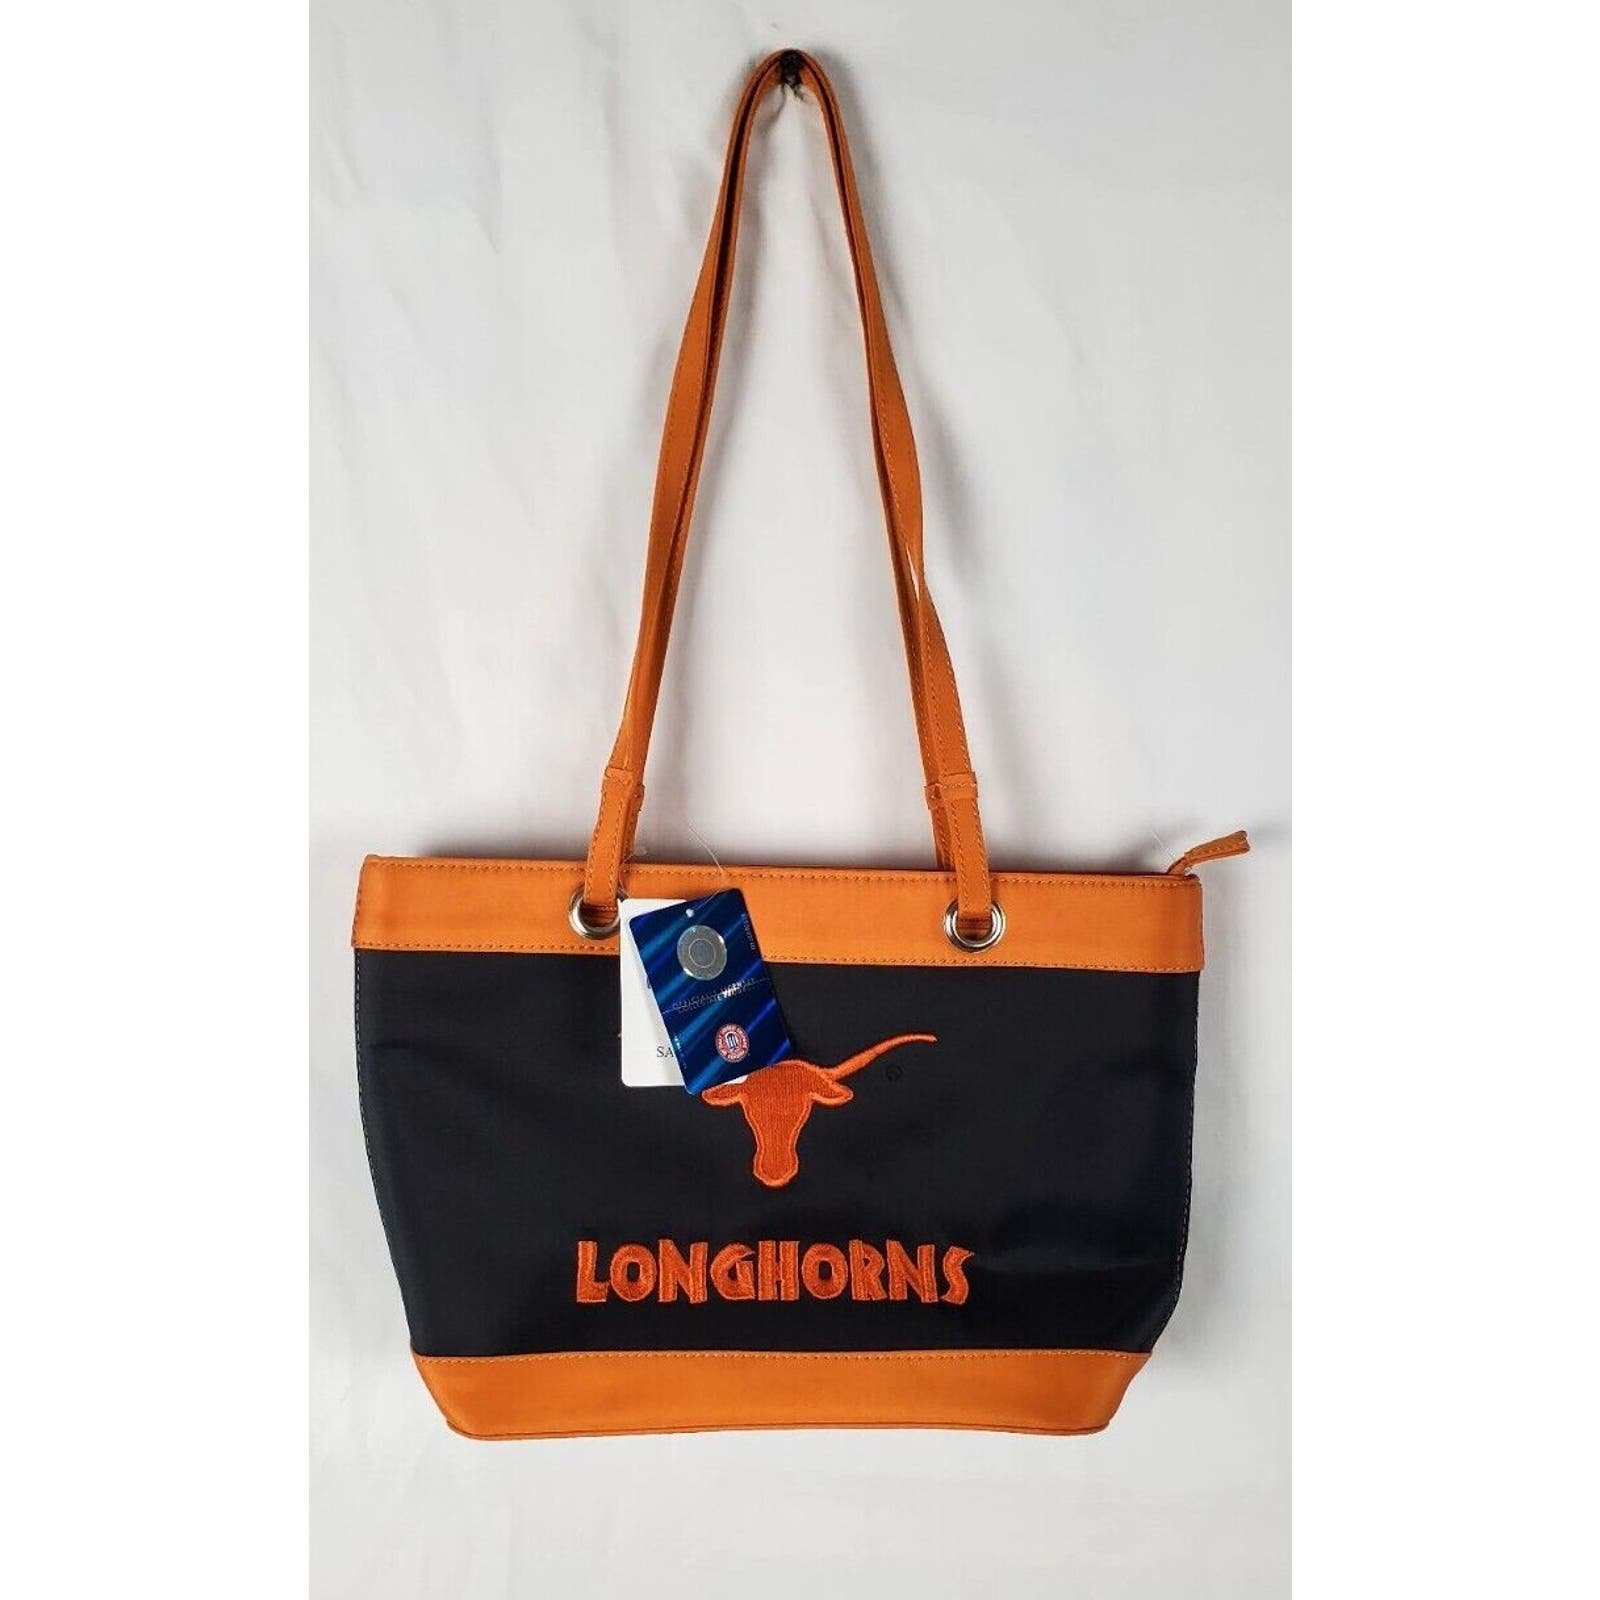 Special offer  TEXAS LONGHORNS Women´s Orange/Black Embroidered Purse New With Tags nYLnaFWqu New Style